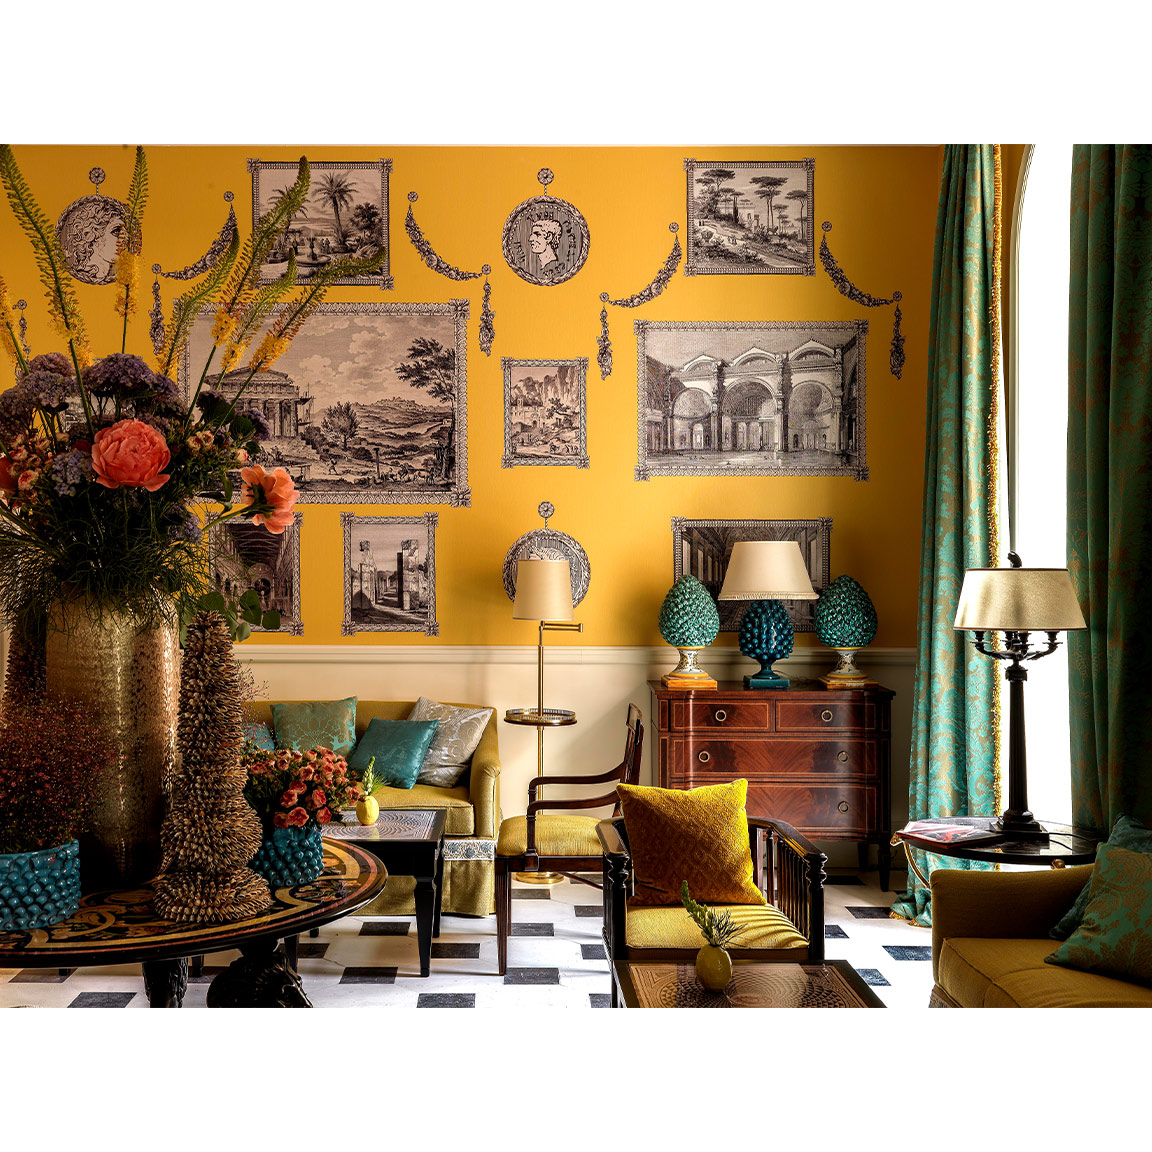 yellow room with wallpaper depicting framed paintings